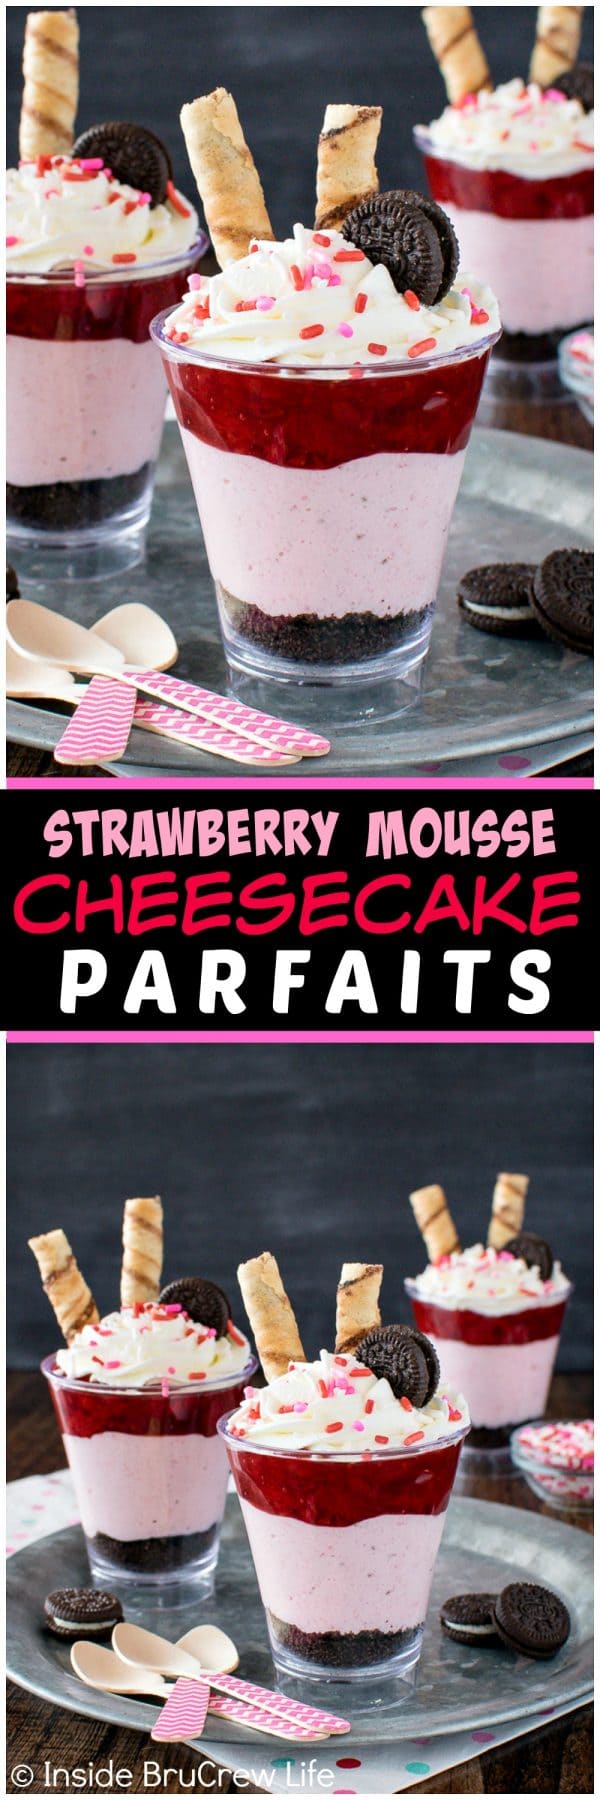 Strawberry Mousse Cheesecake Parfaits - layers of no bake cheesecake, pie filling, and cookies make an easy dessert recipe. Perfect for Valentine's day!